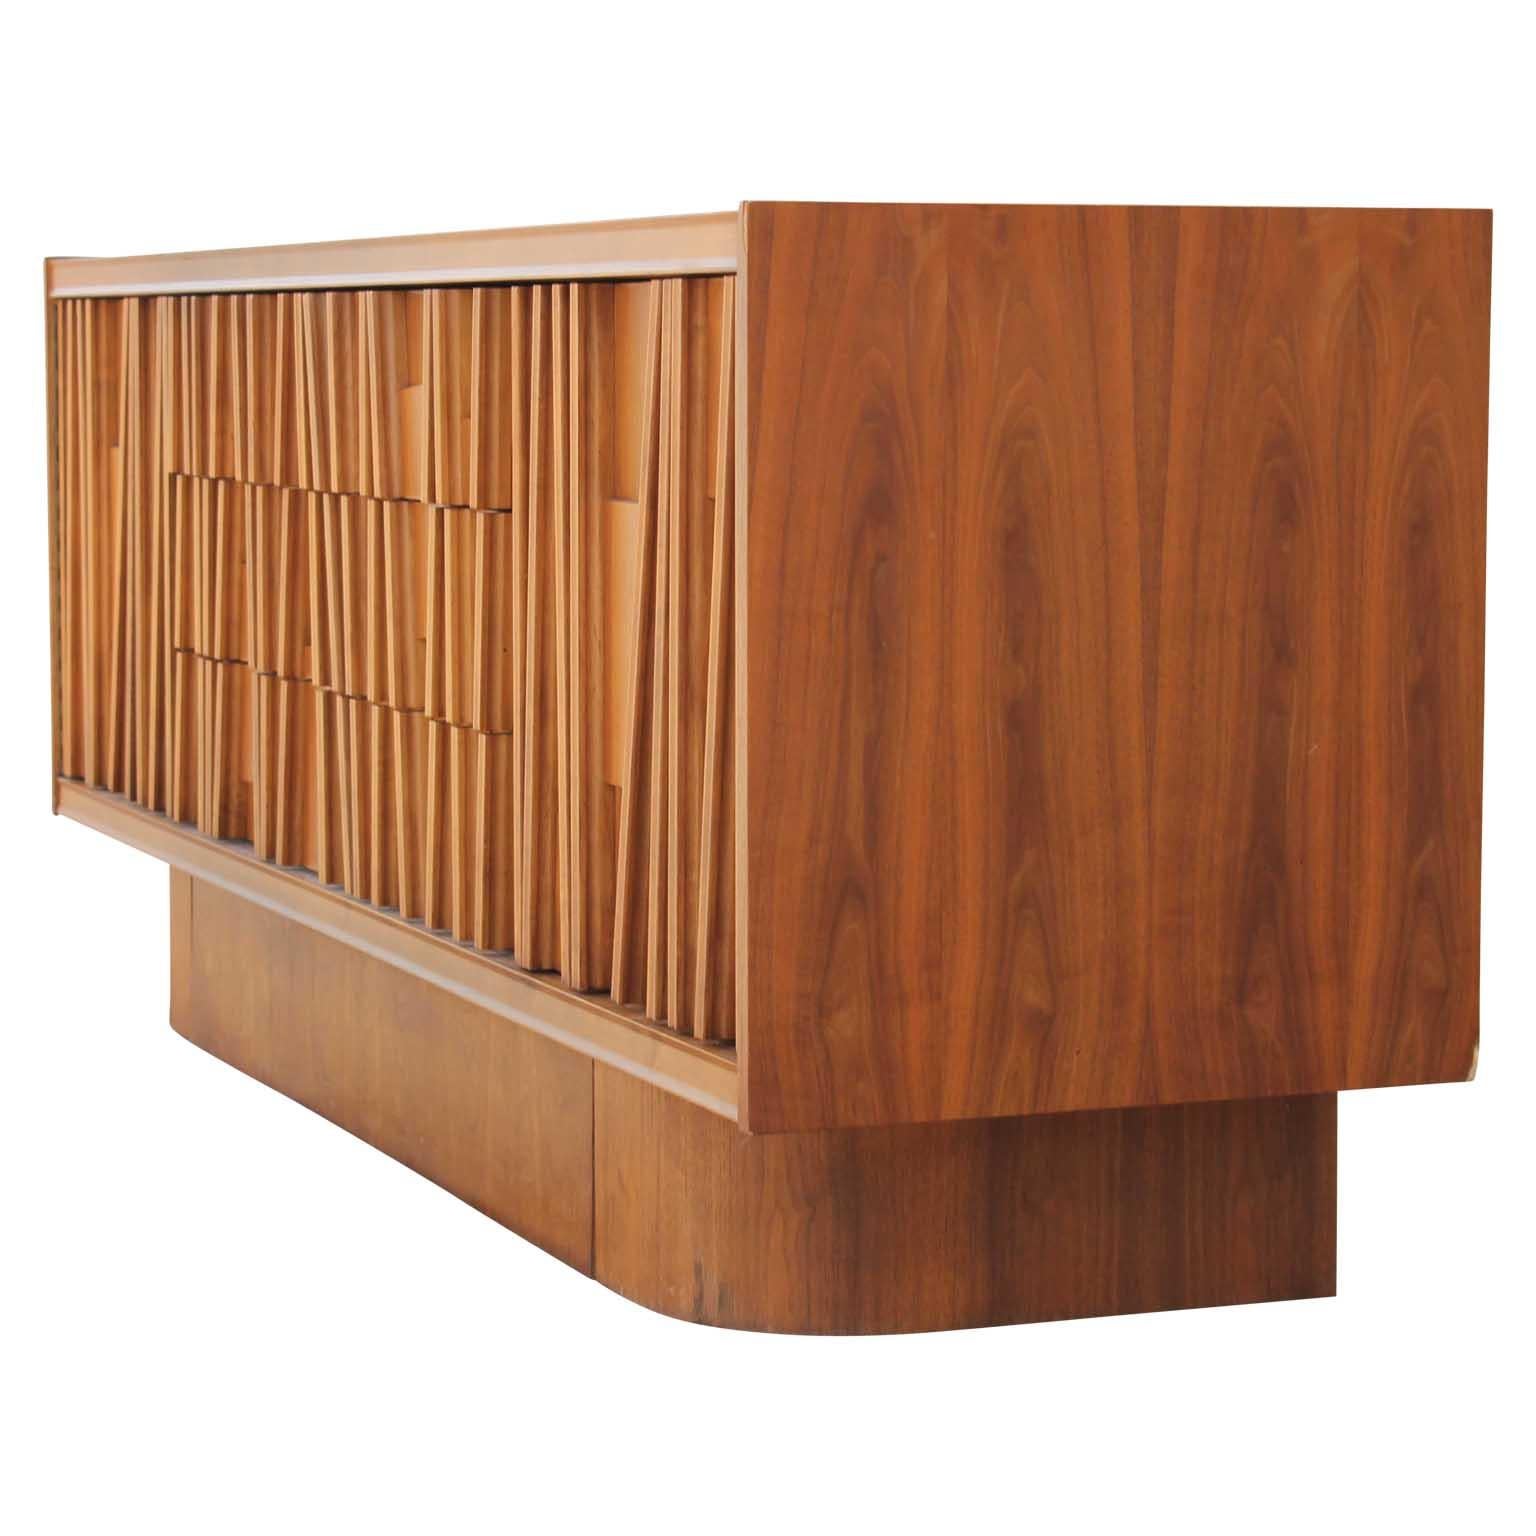 Stunning Brutalist credenza. It has three drawers and two cabinet spaces with magnetic closures for storage. The front has a linear mosaic wood design that camouflages the drawers and doors. There are no makers marks.

      